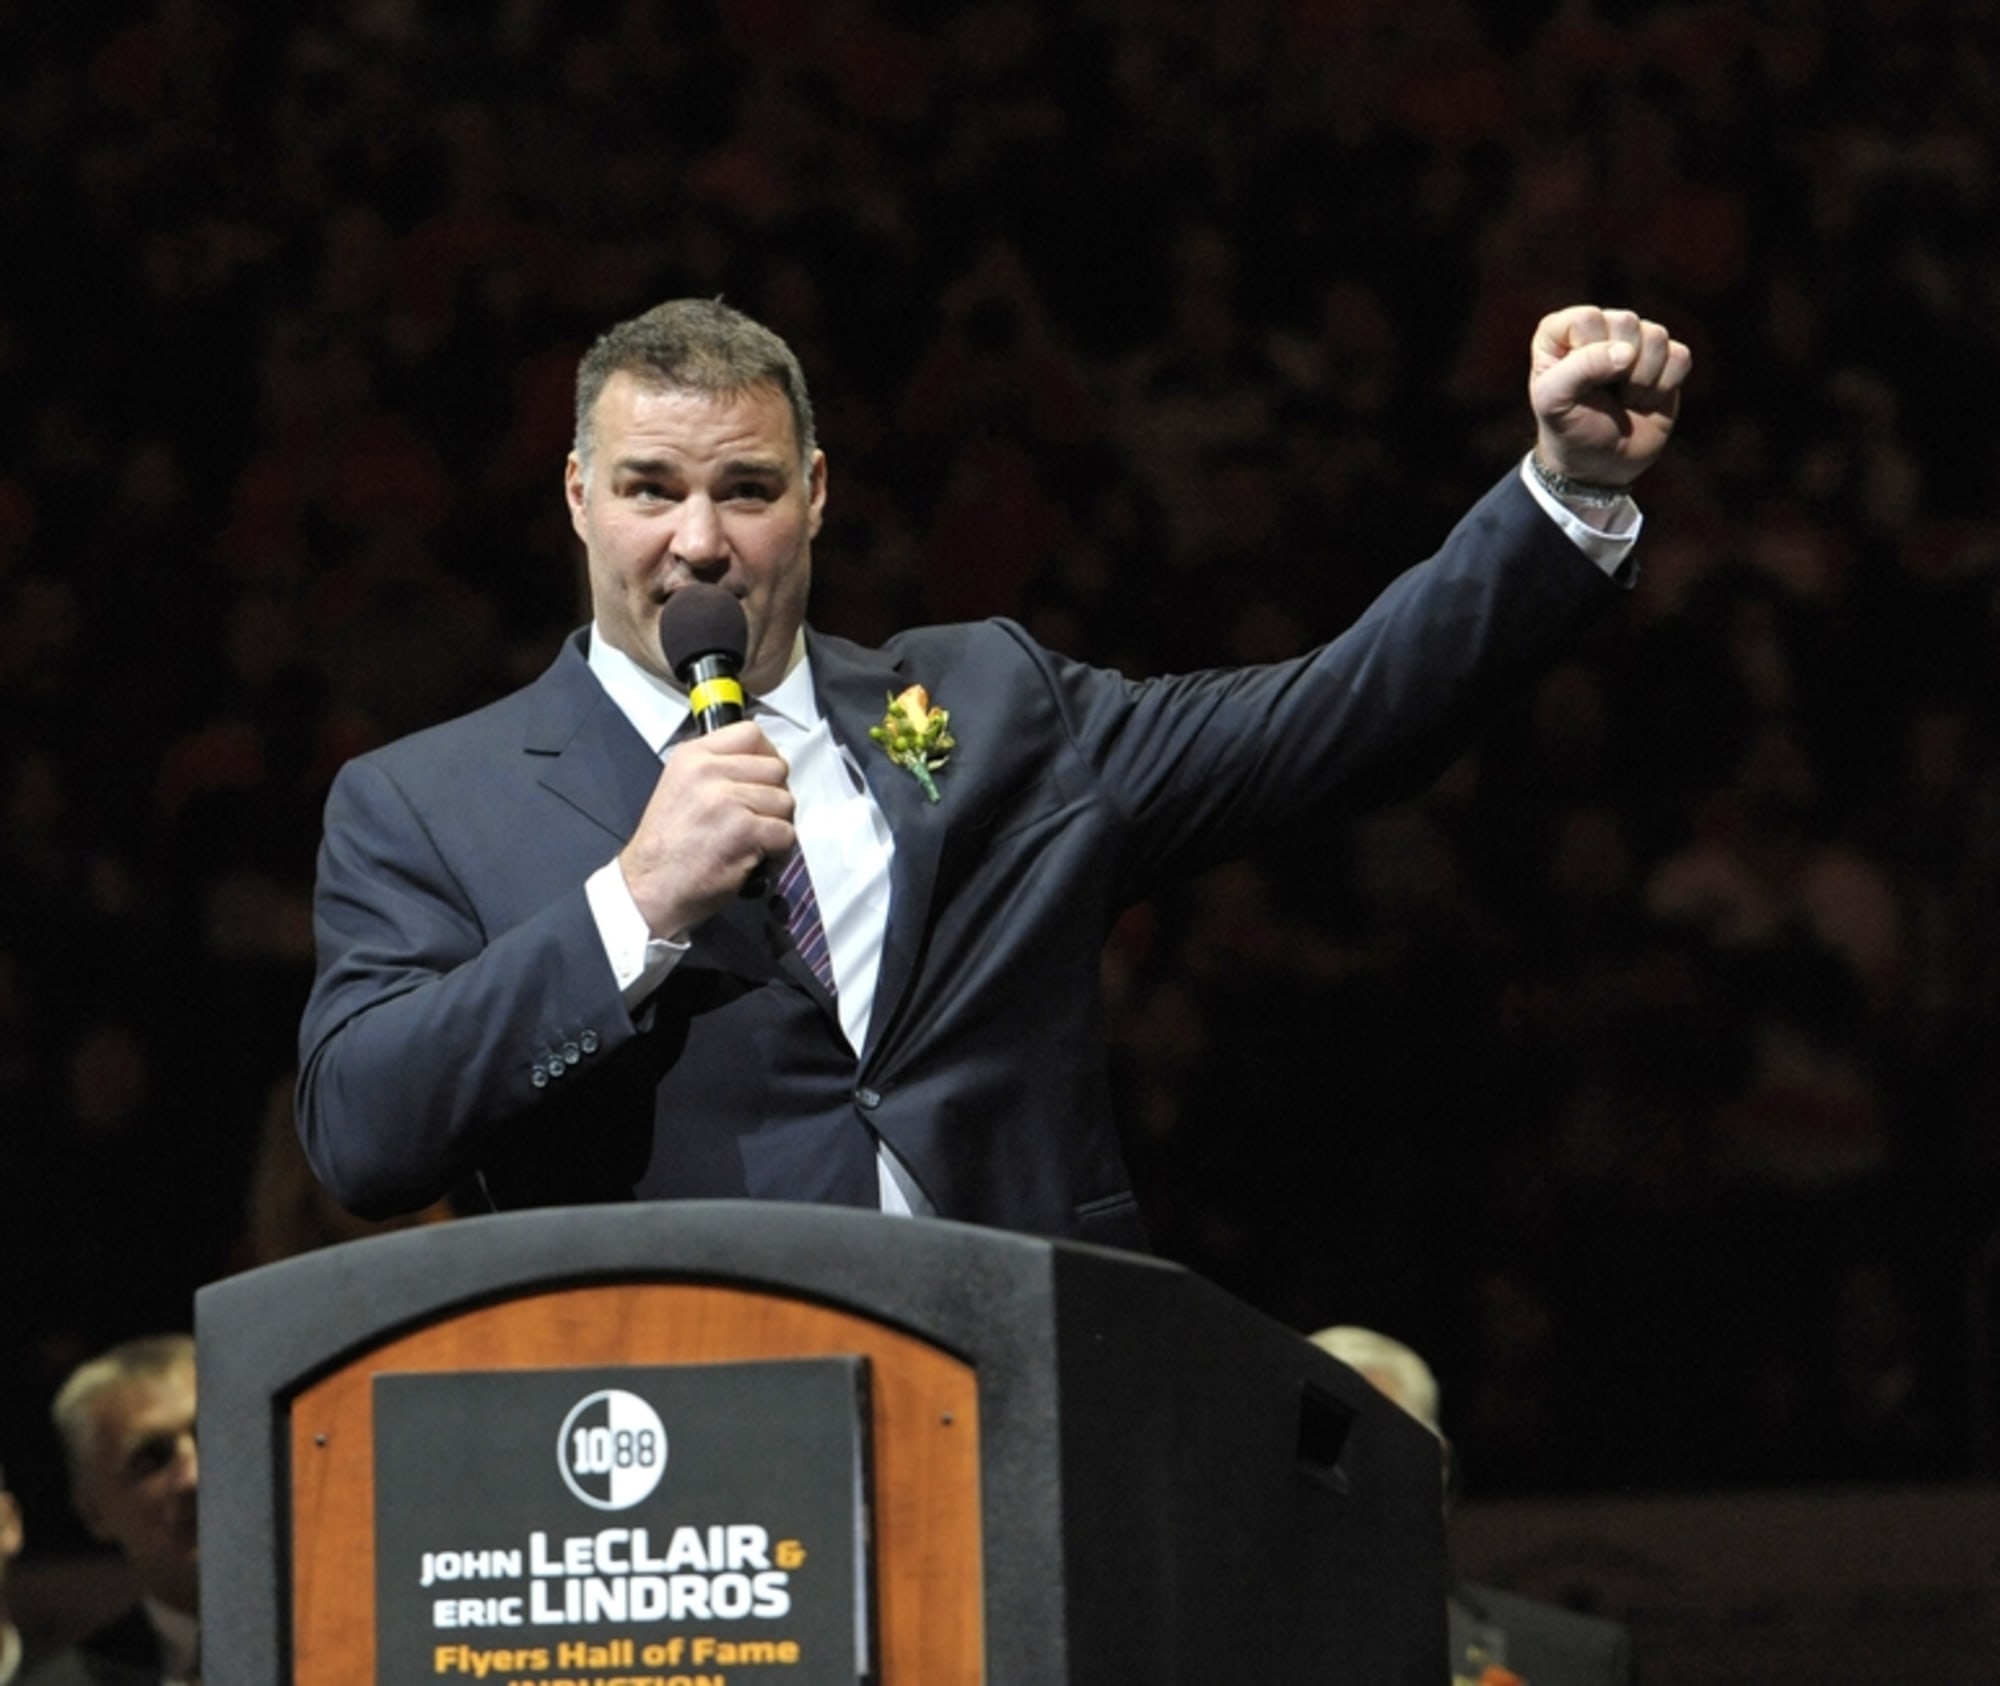 Eric Lindros' Hall of Fame career was without compare